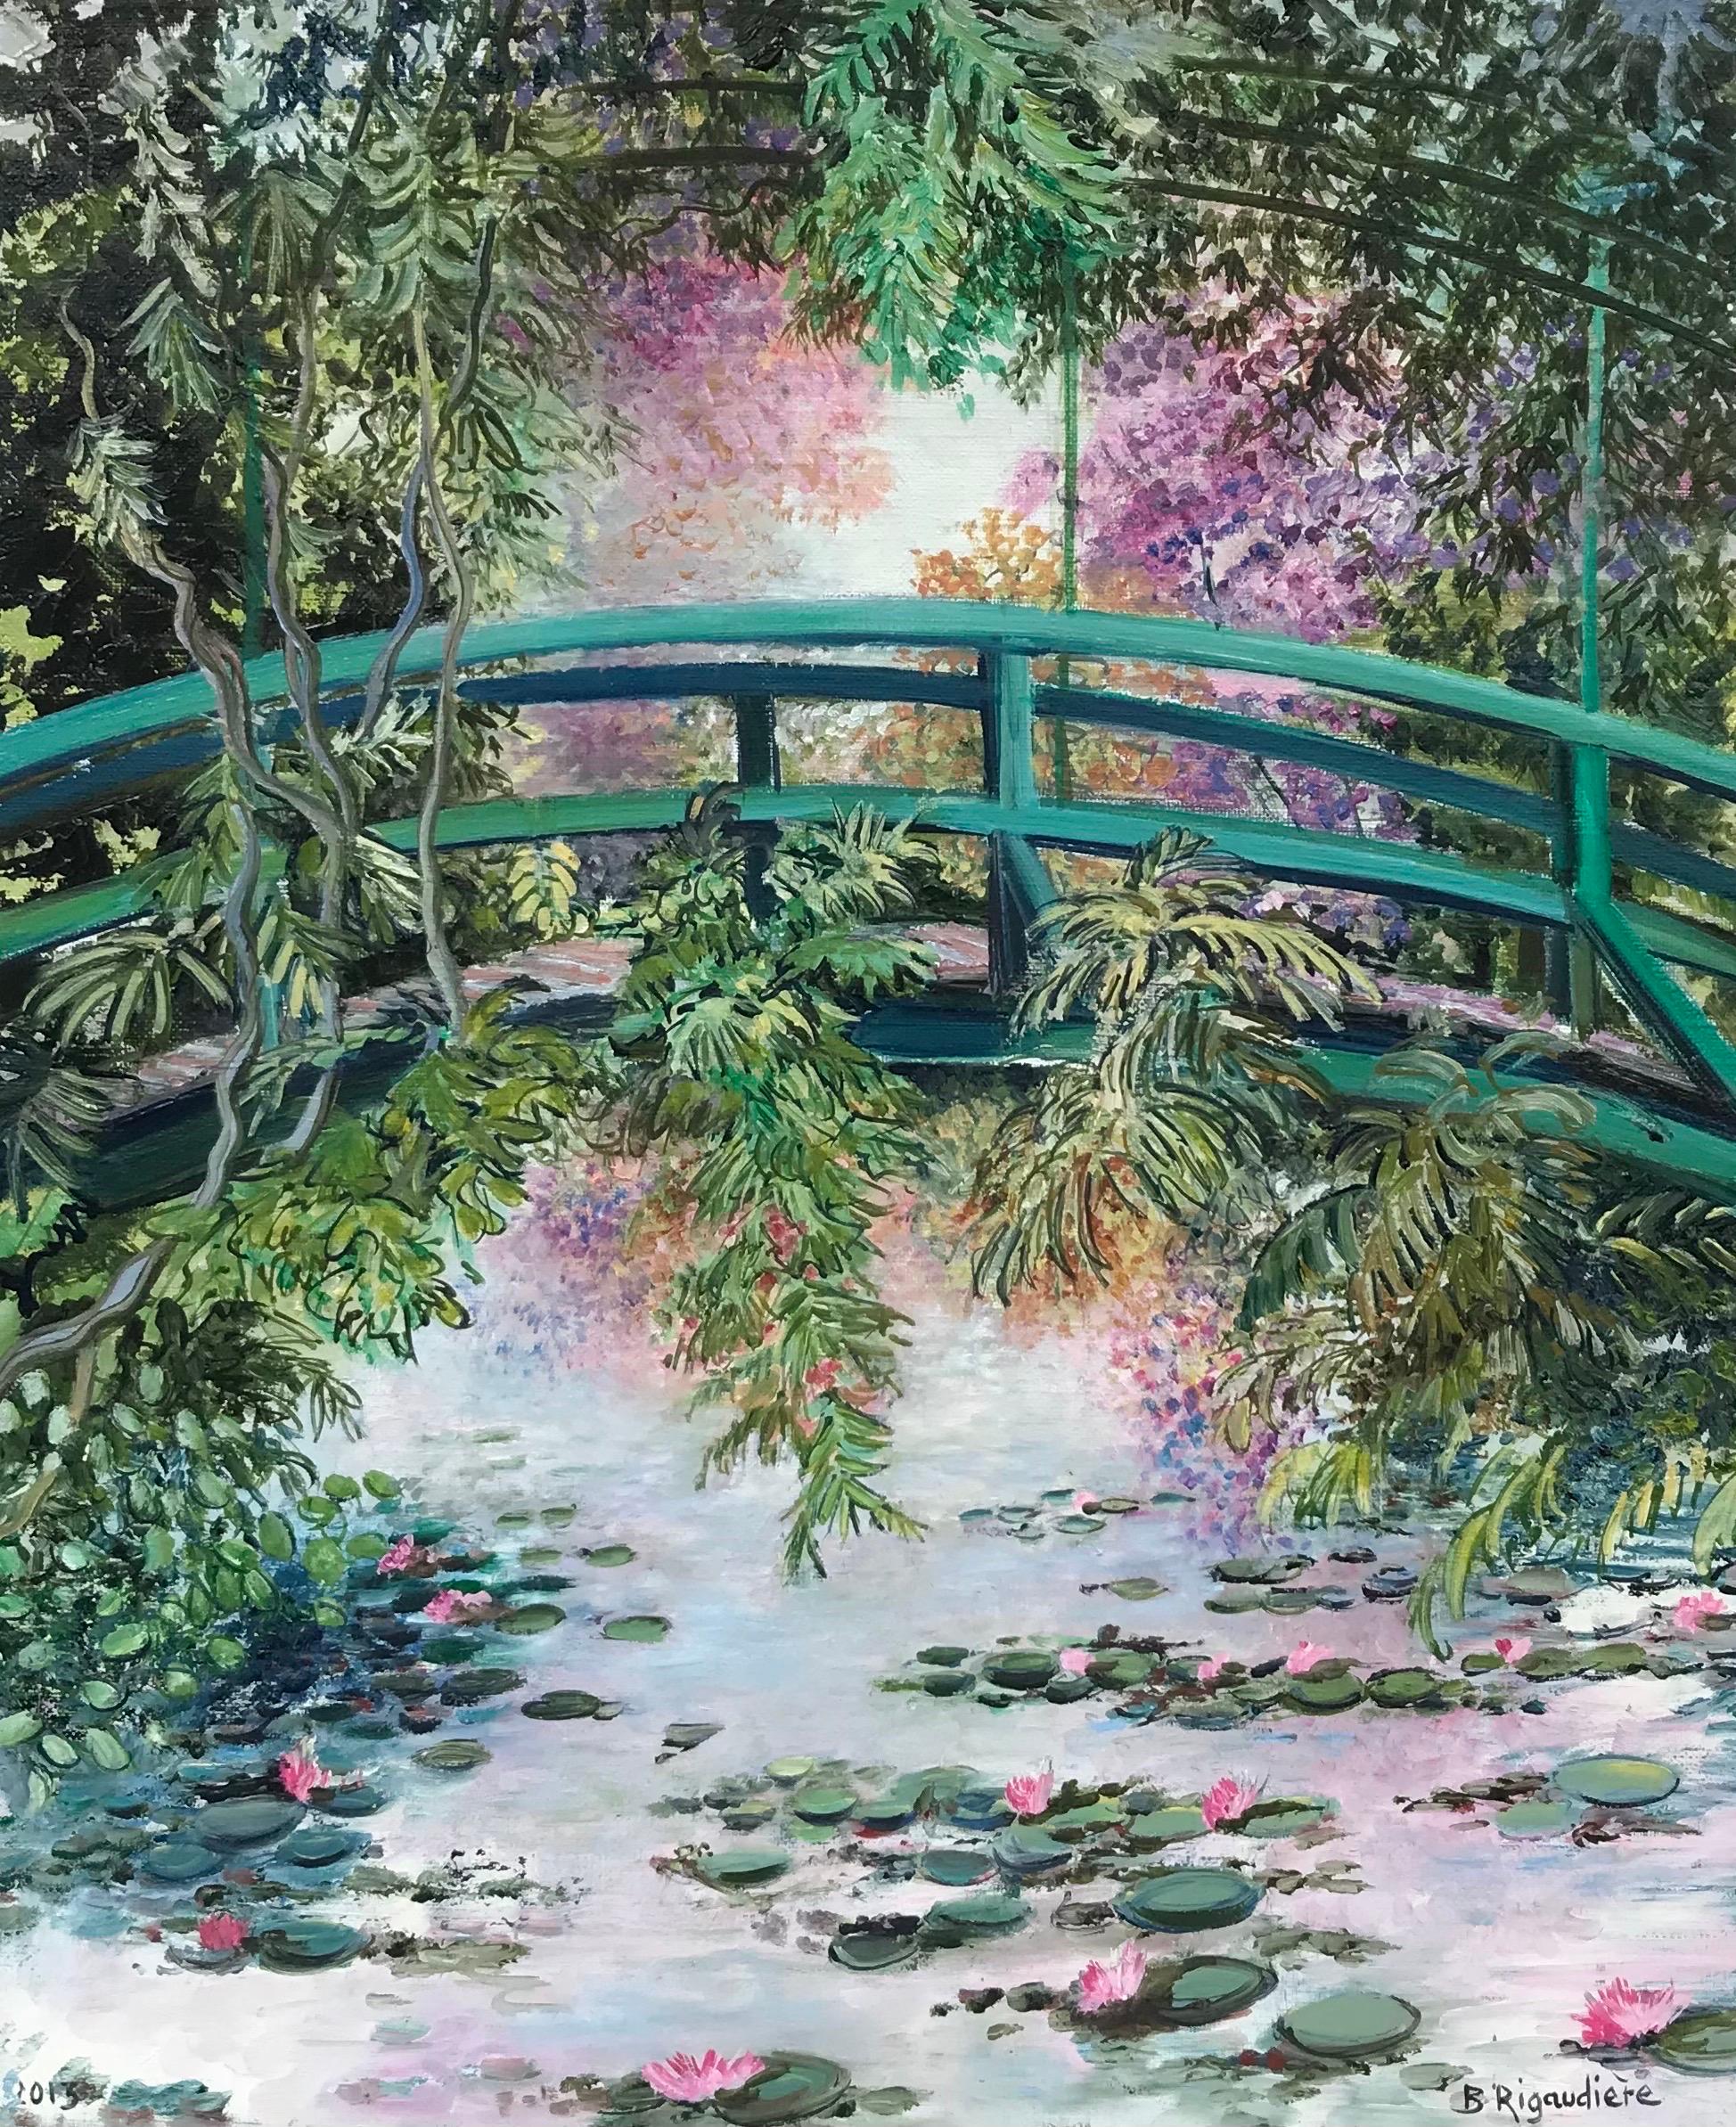 B. Rigaudiere Landscape Painting - Japanese Bridge Monet's Waterlily Pond Giverny, Signed French Impressionist Oil